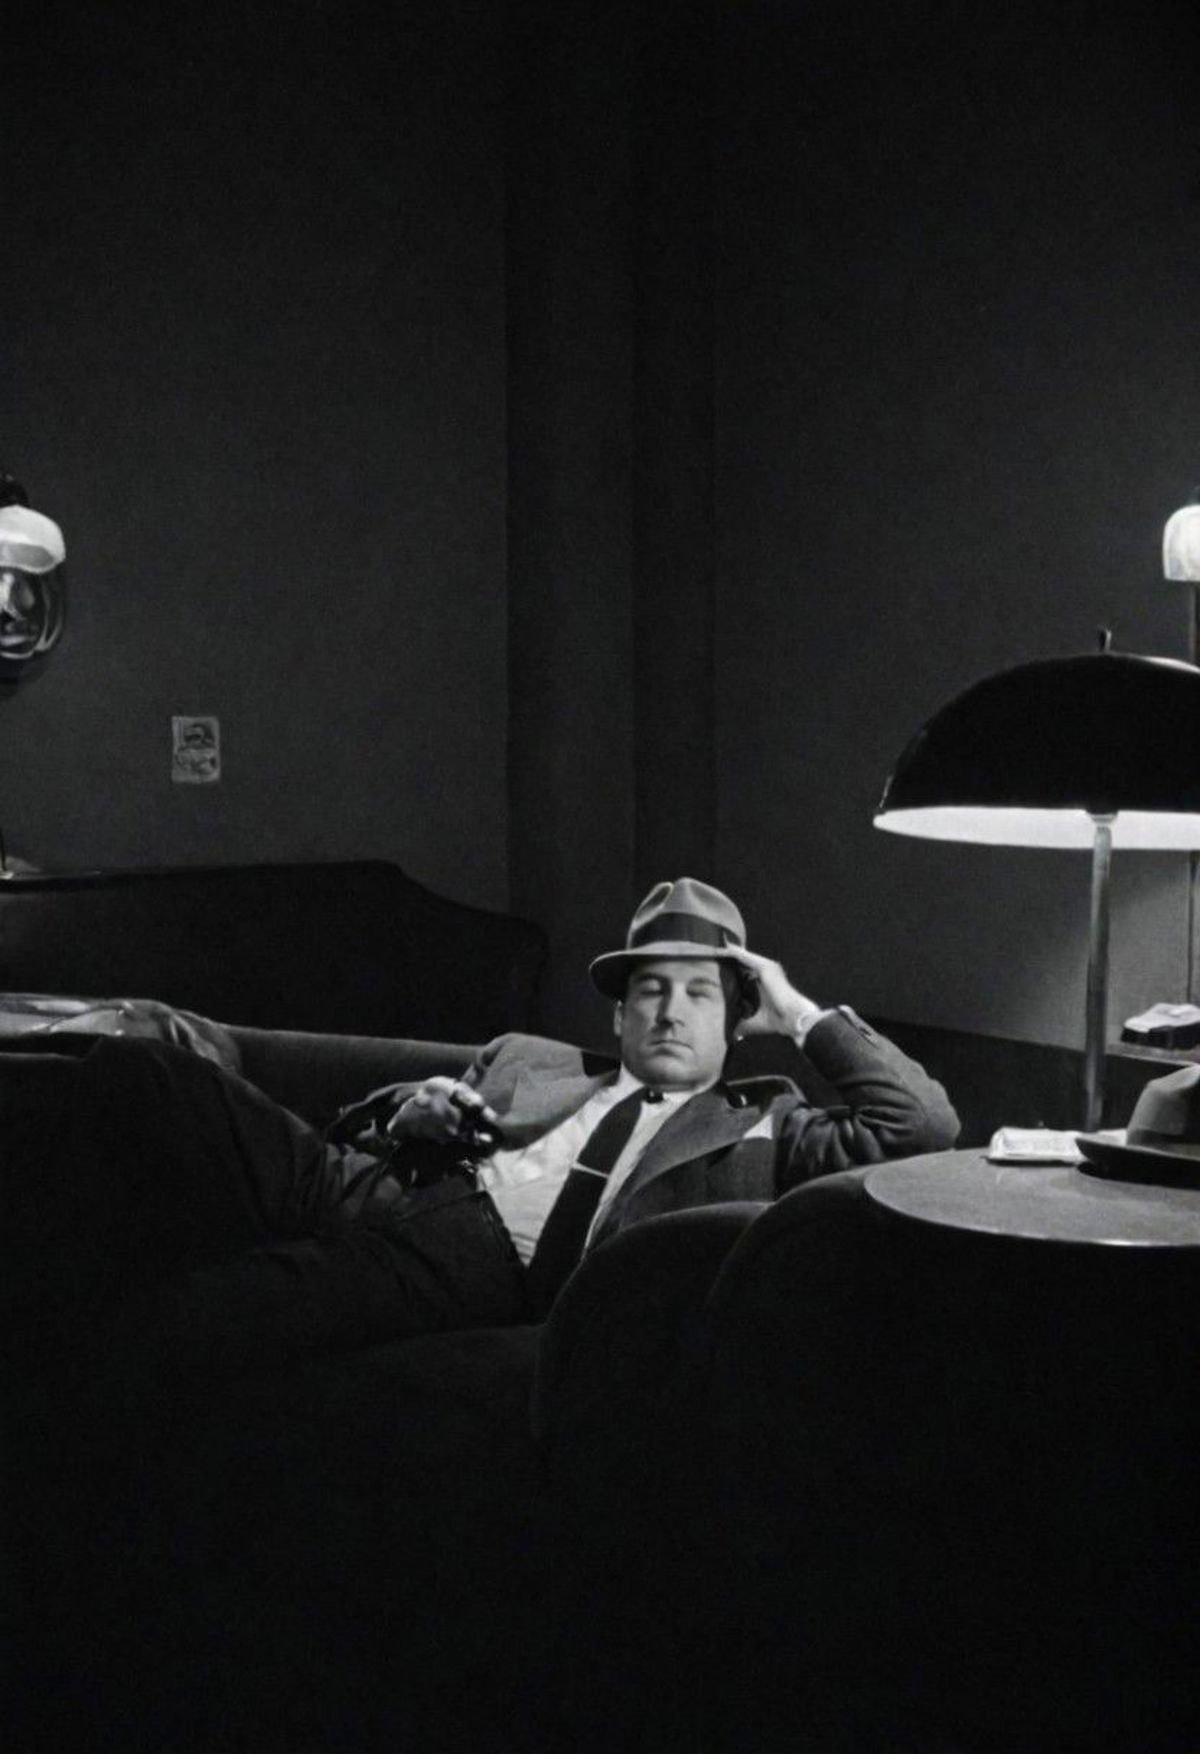 A man with a hat and tie is sitting on a couch in a dark room.